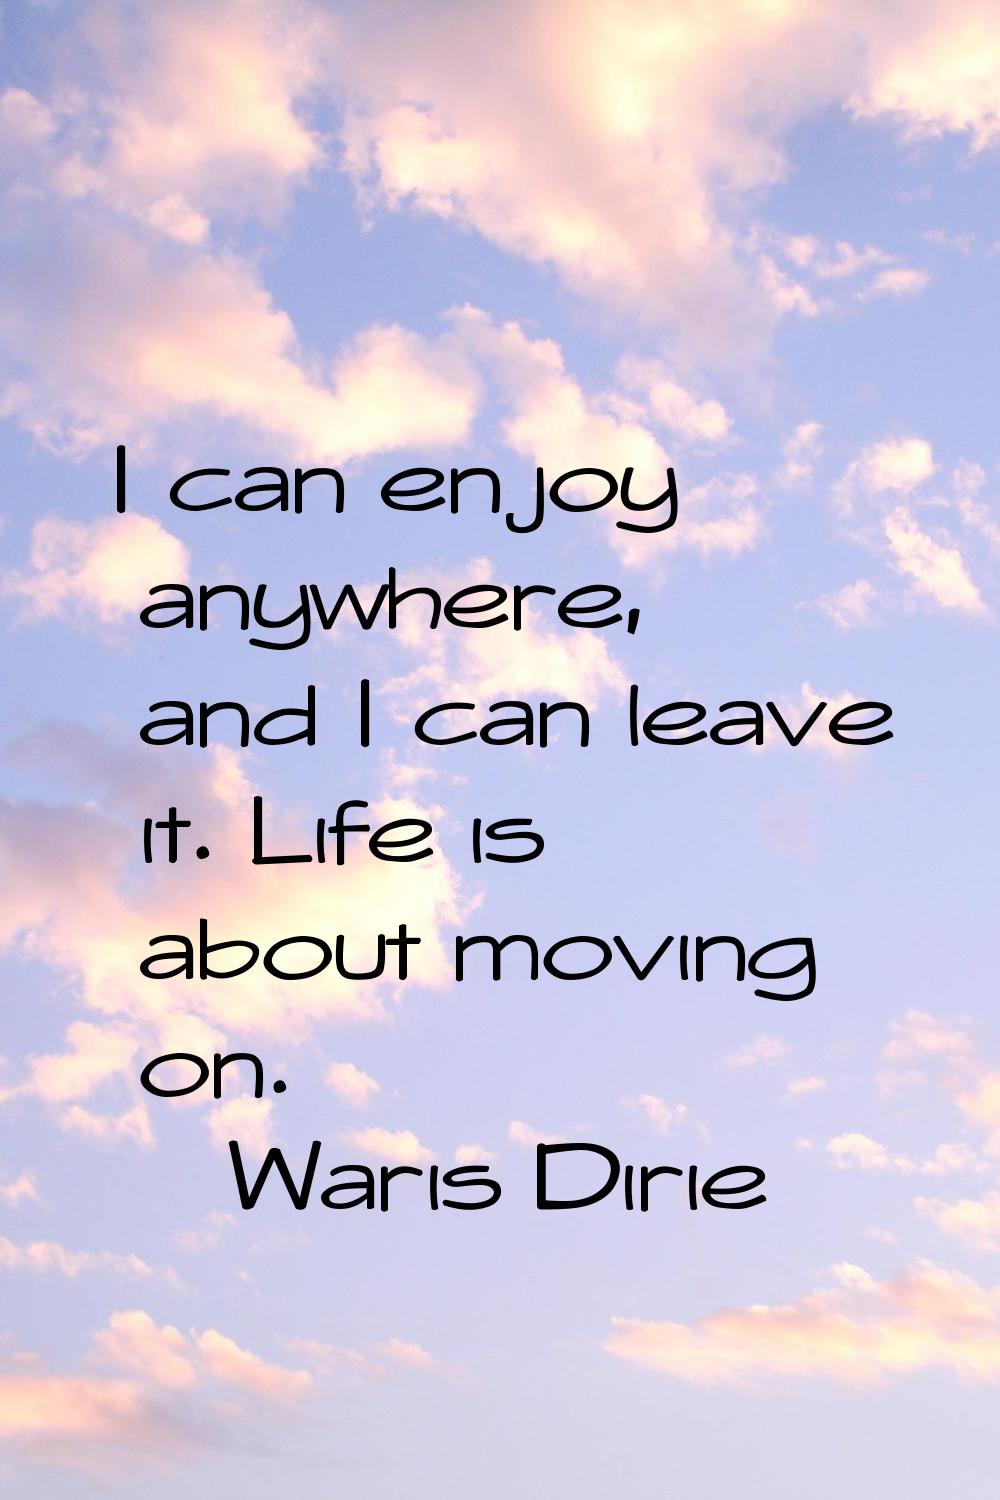 I can enjoy anywhere, and I can leave it. Life is about moving on.